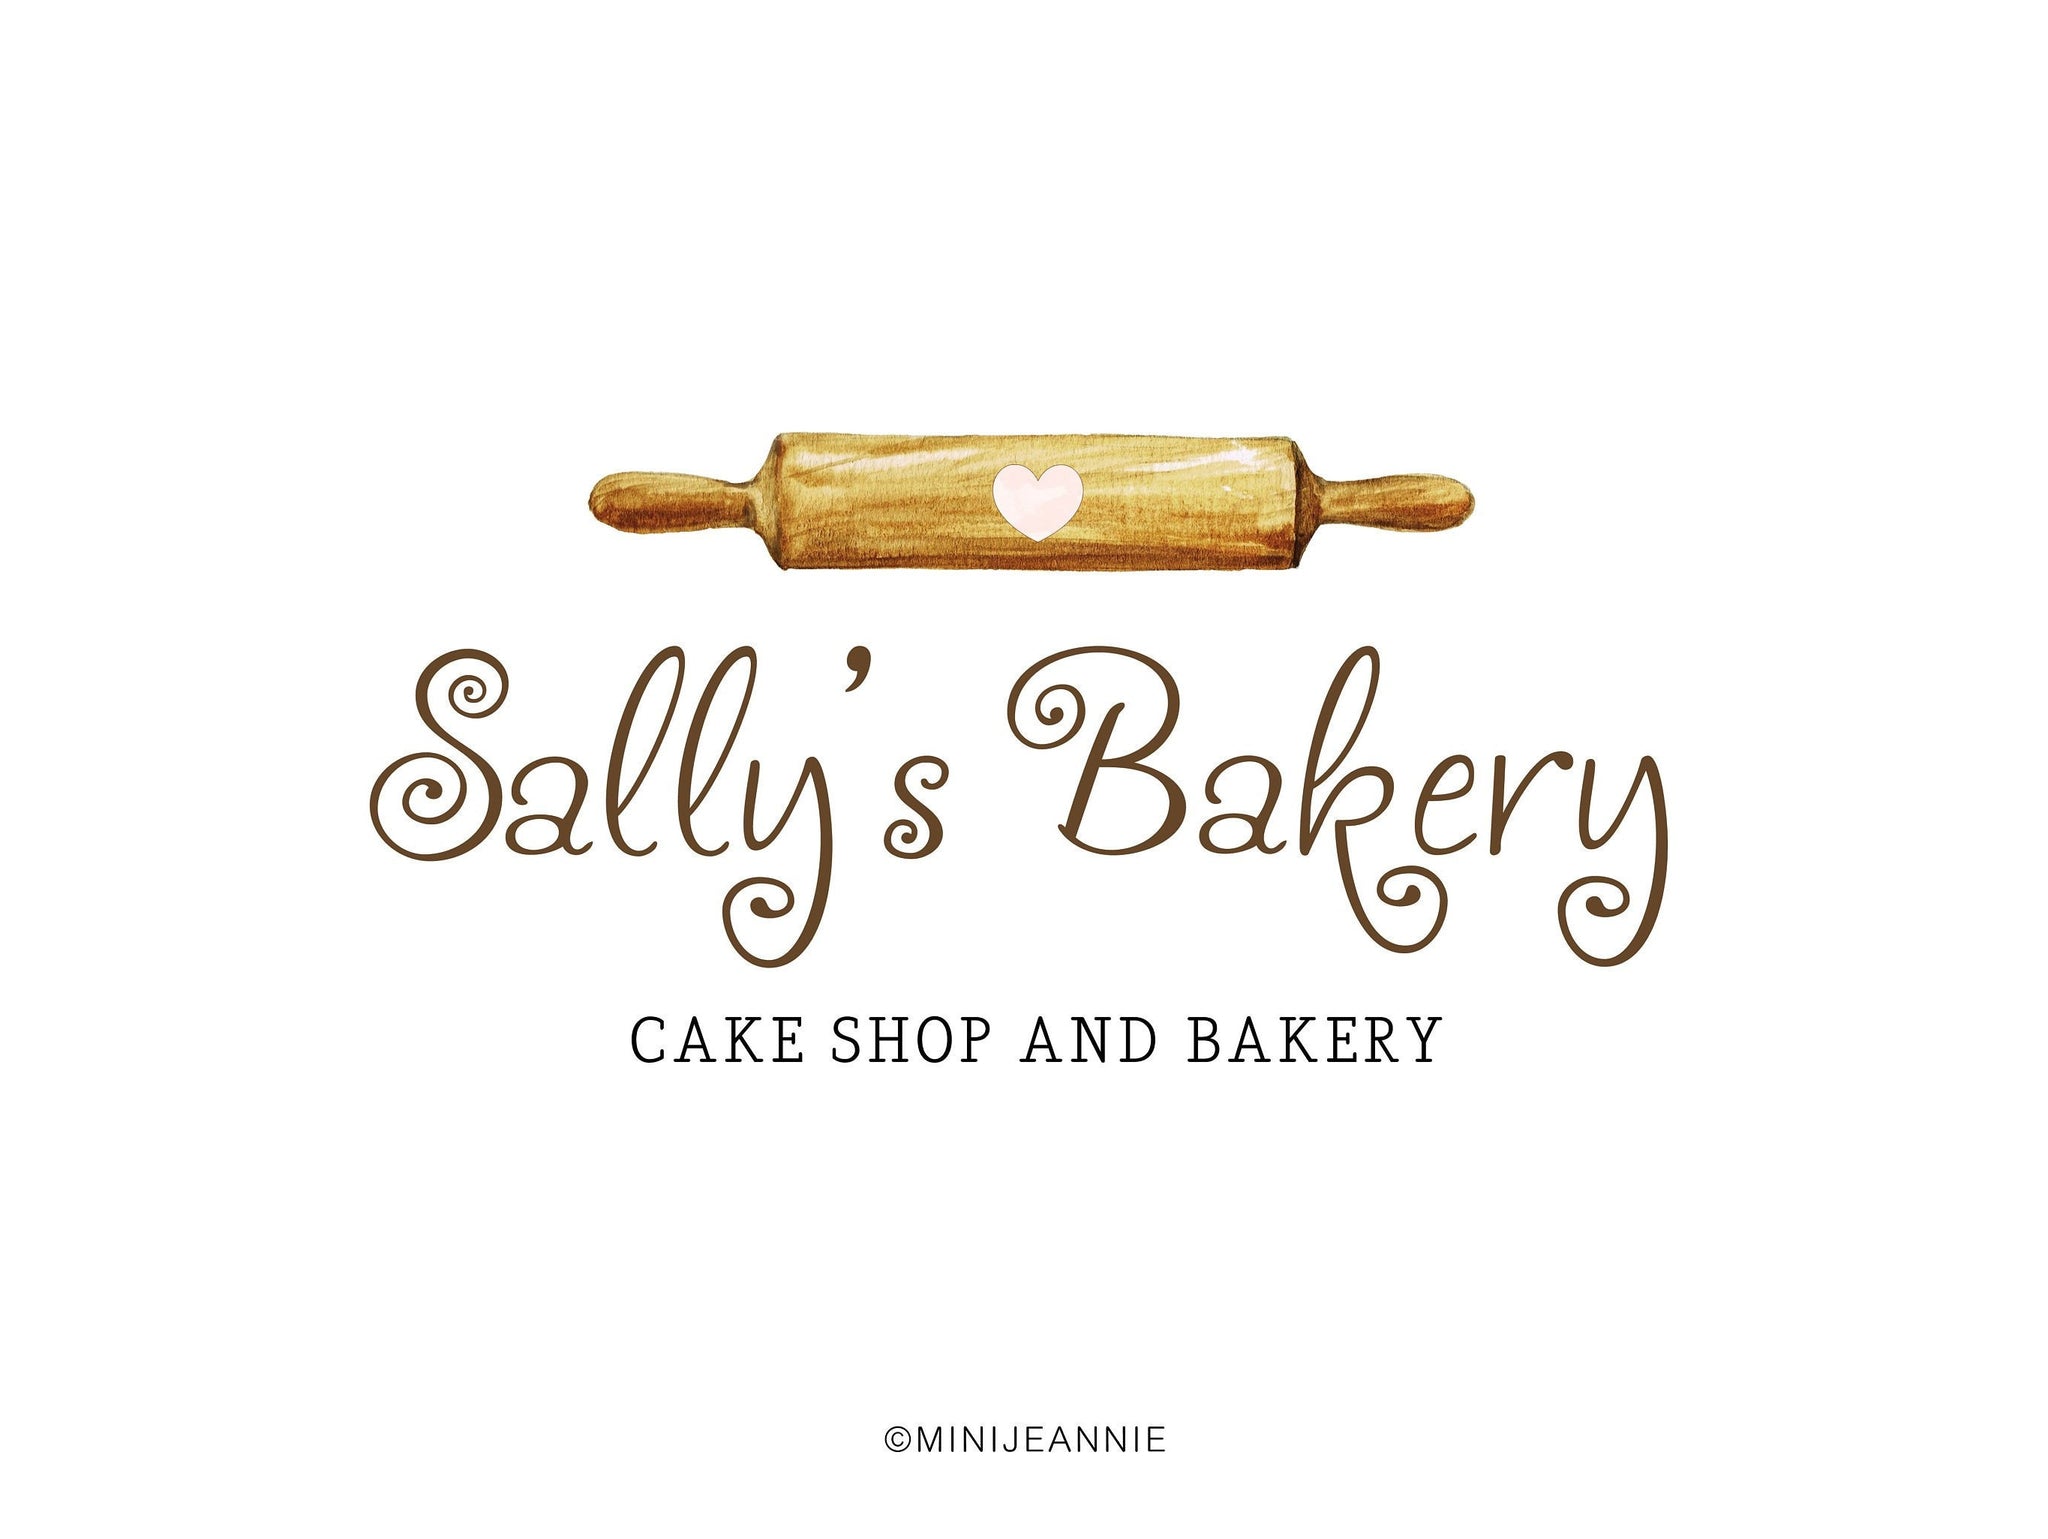 Bakery Logo Design with Rolling Pin Logo-Cooking and Cake Shop Logo